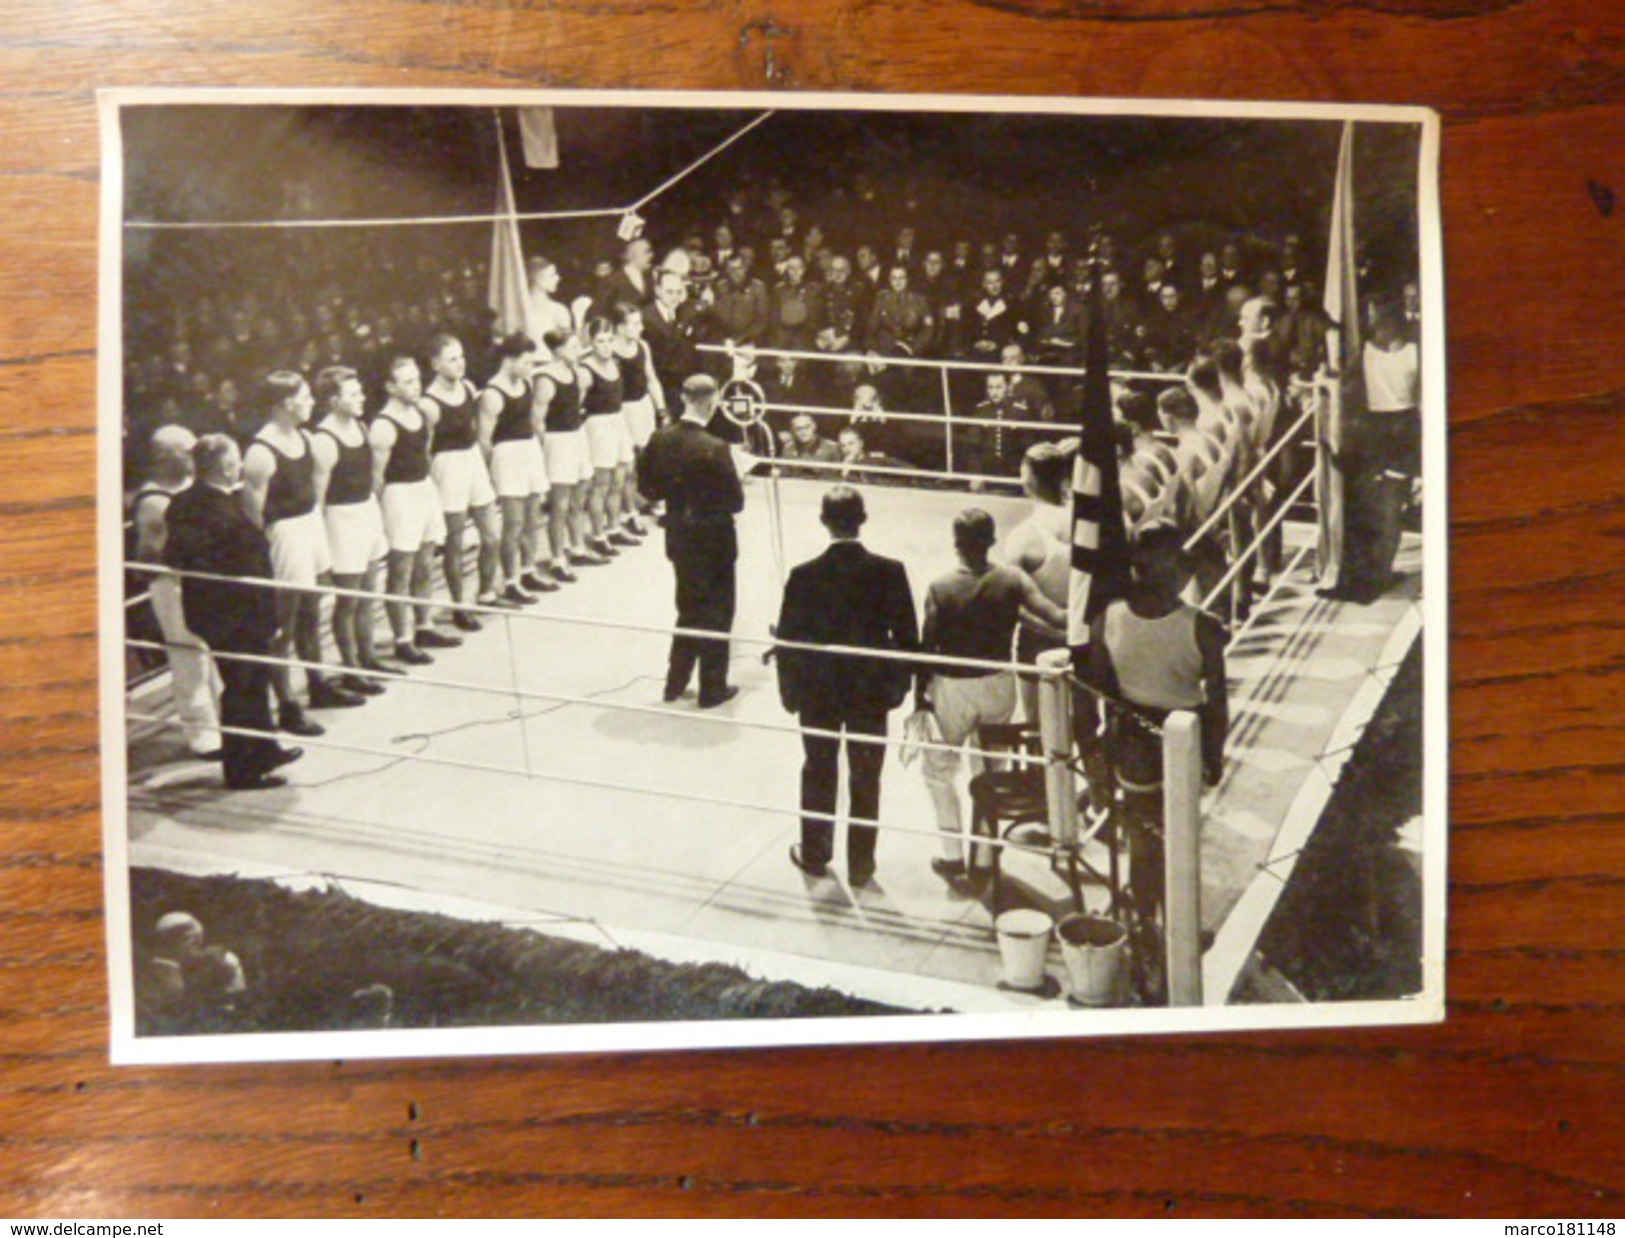 OLYMPIA 1936 - Band 1 - Bild Nr 145 Gruppe 55 - Boxe (Allemagne Pologne) - Sport